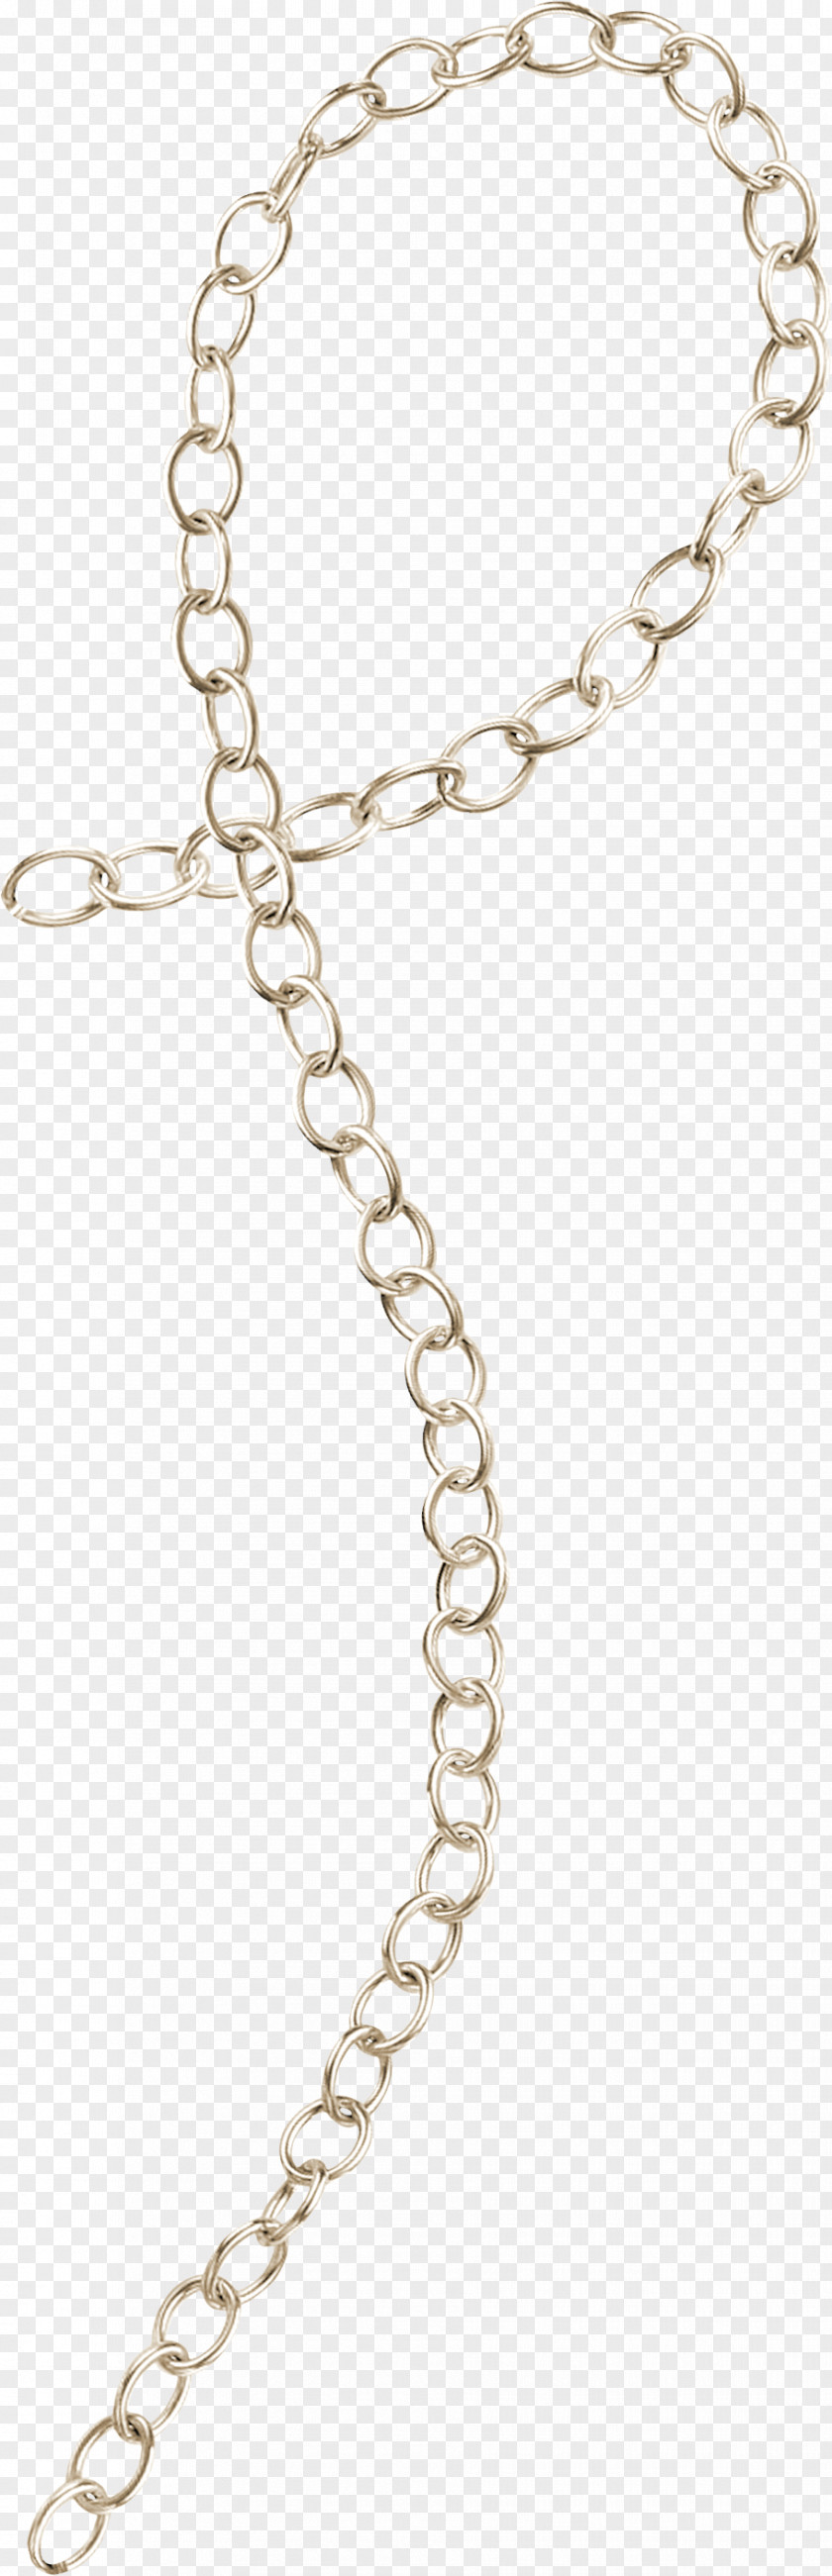 Anastasia Chain Jewellery Necklace Clip Art PNG